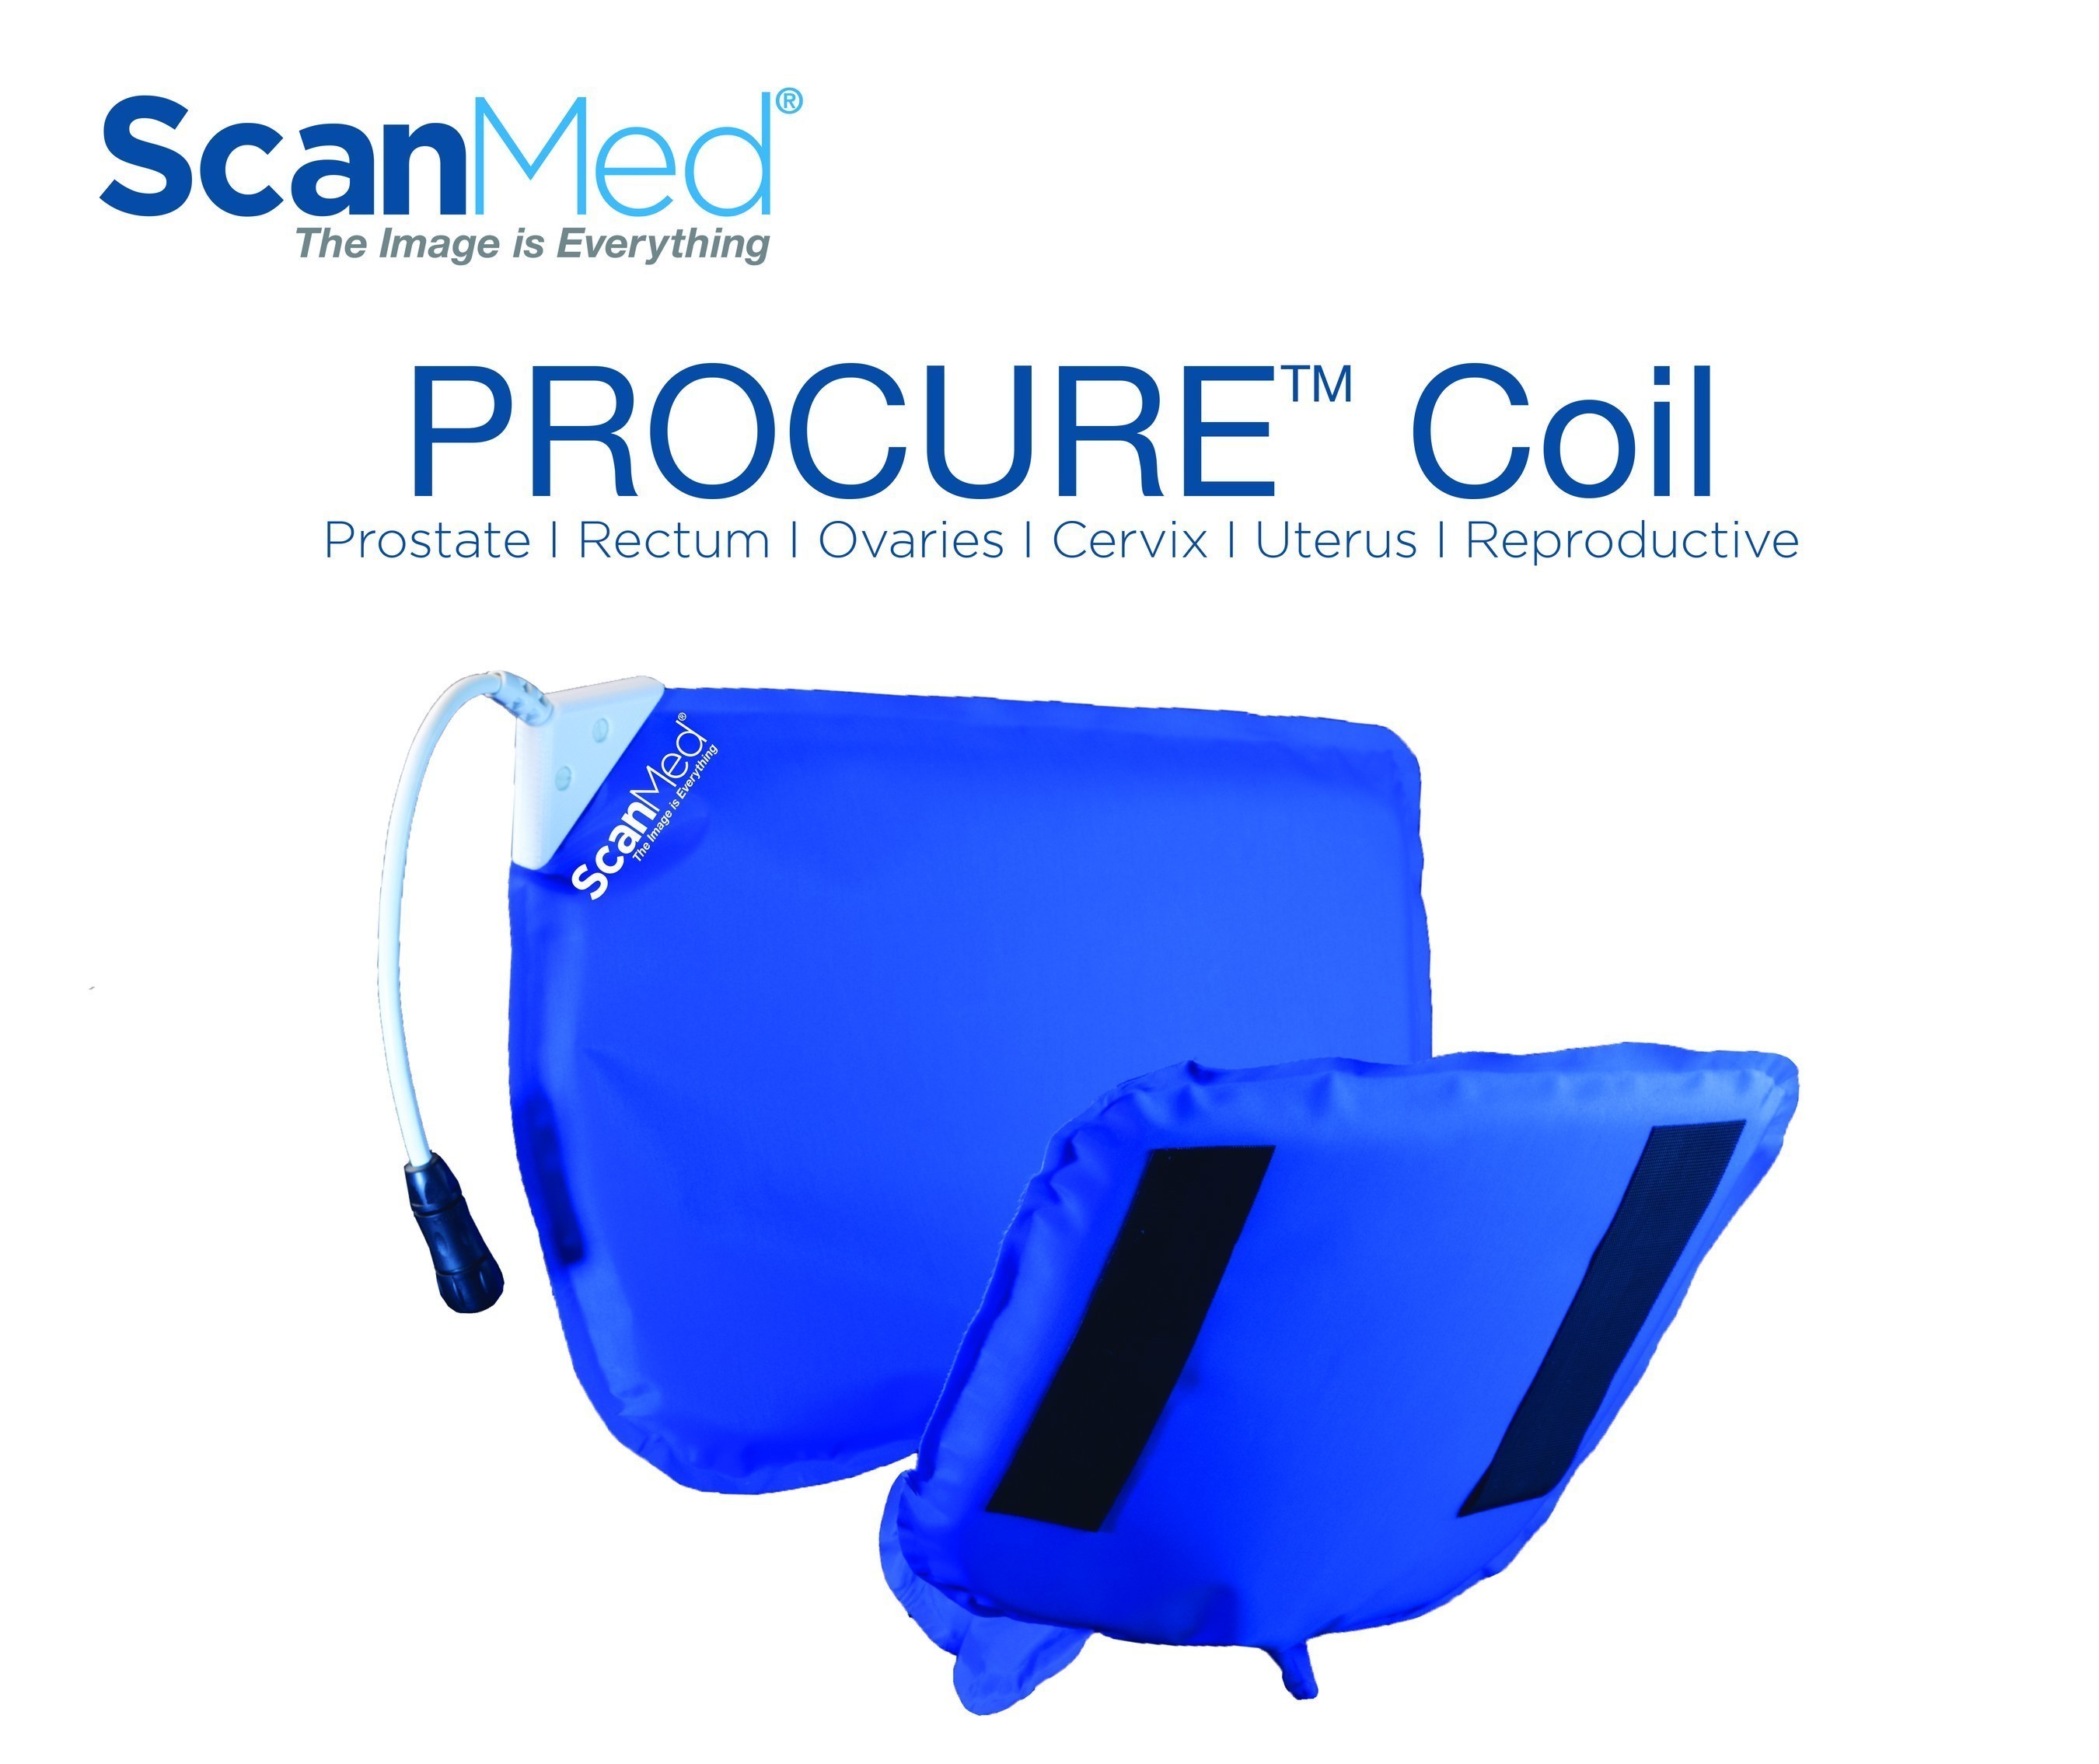 ScanMed meets global success with the world's first non-invasive, wearable prostate MRI coil, the PROCURE Coil. ScanMed CEO and inventor, Dr. Randall Jones, is awarded 11th patent for his invention.